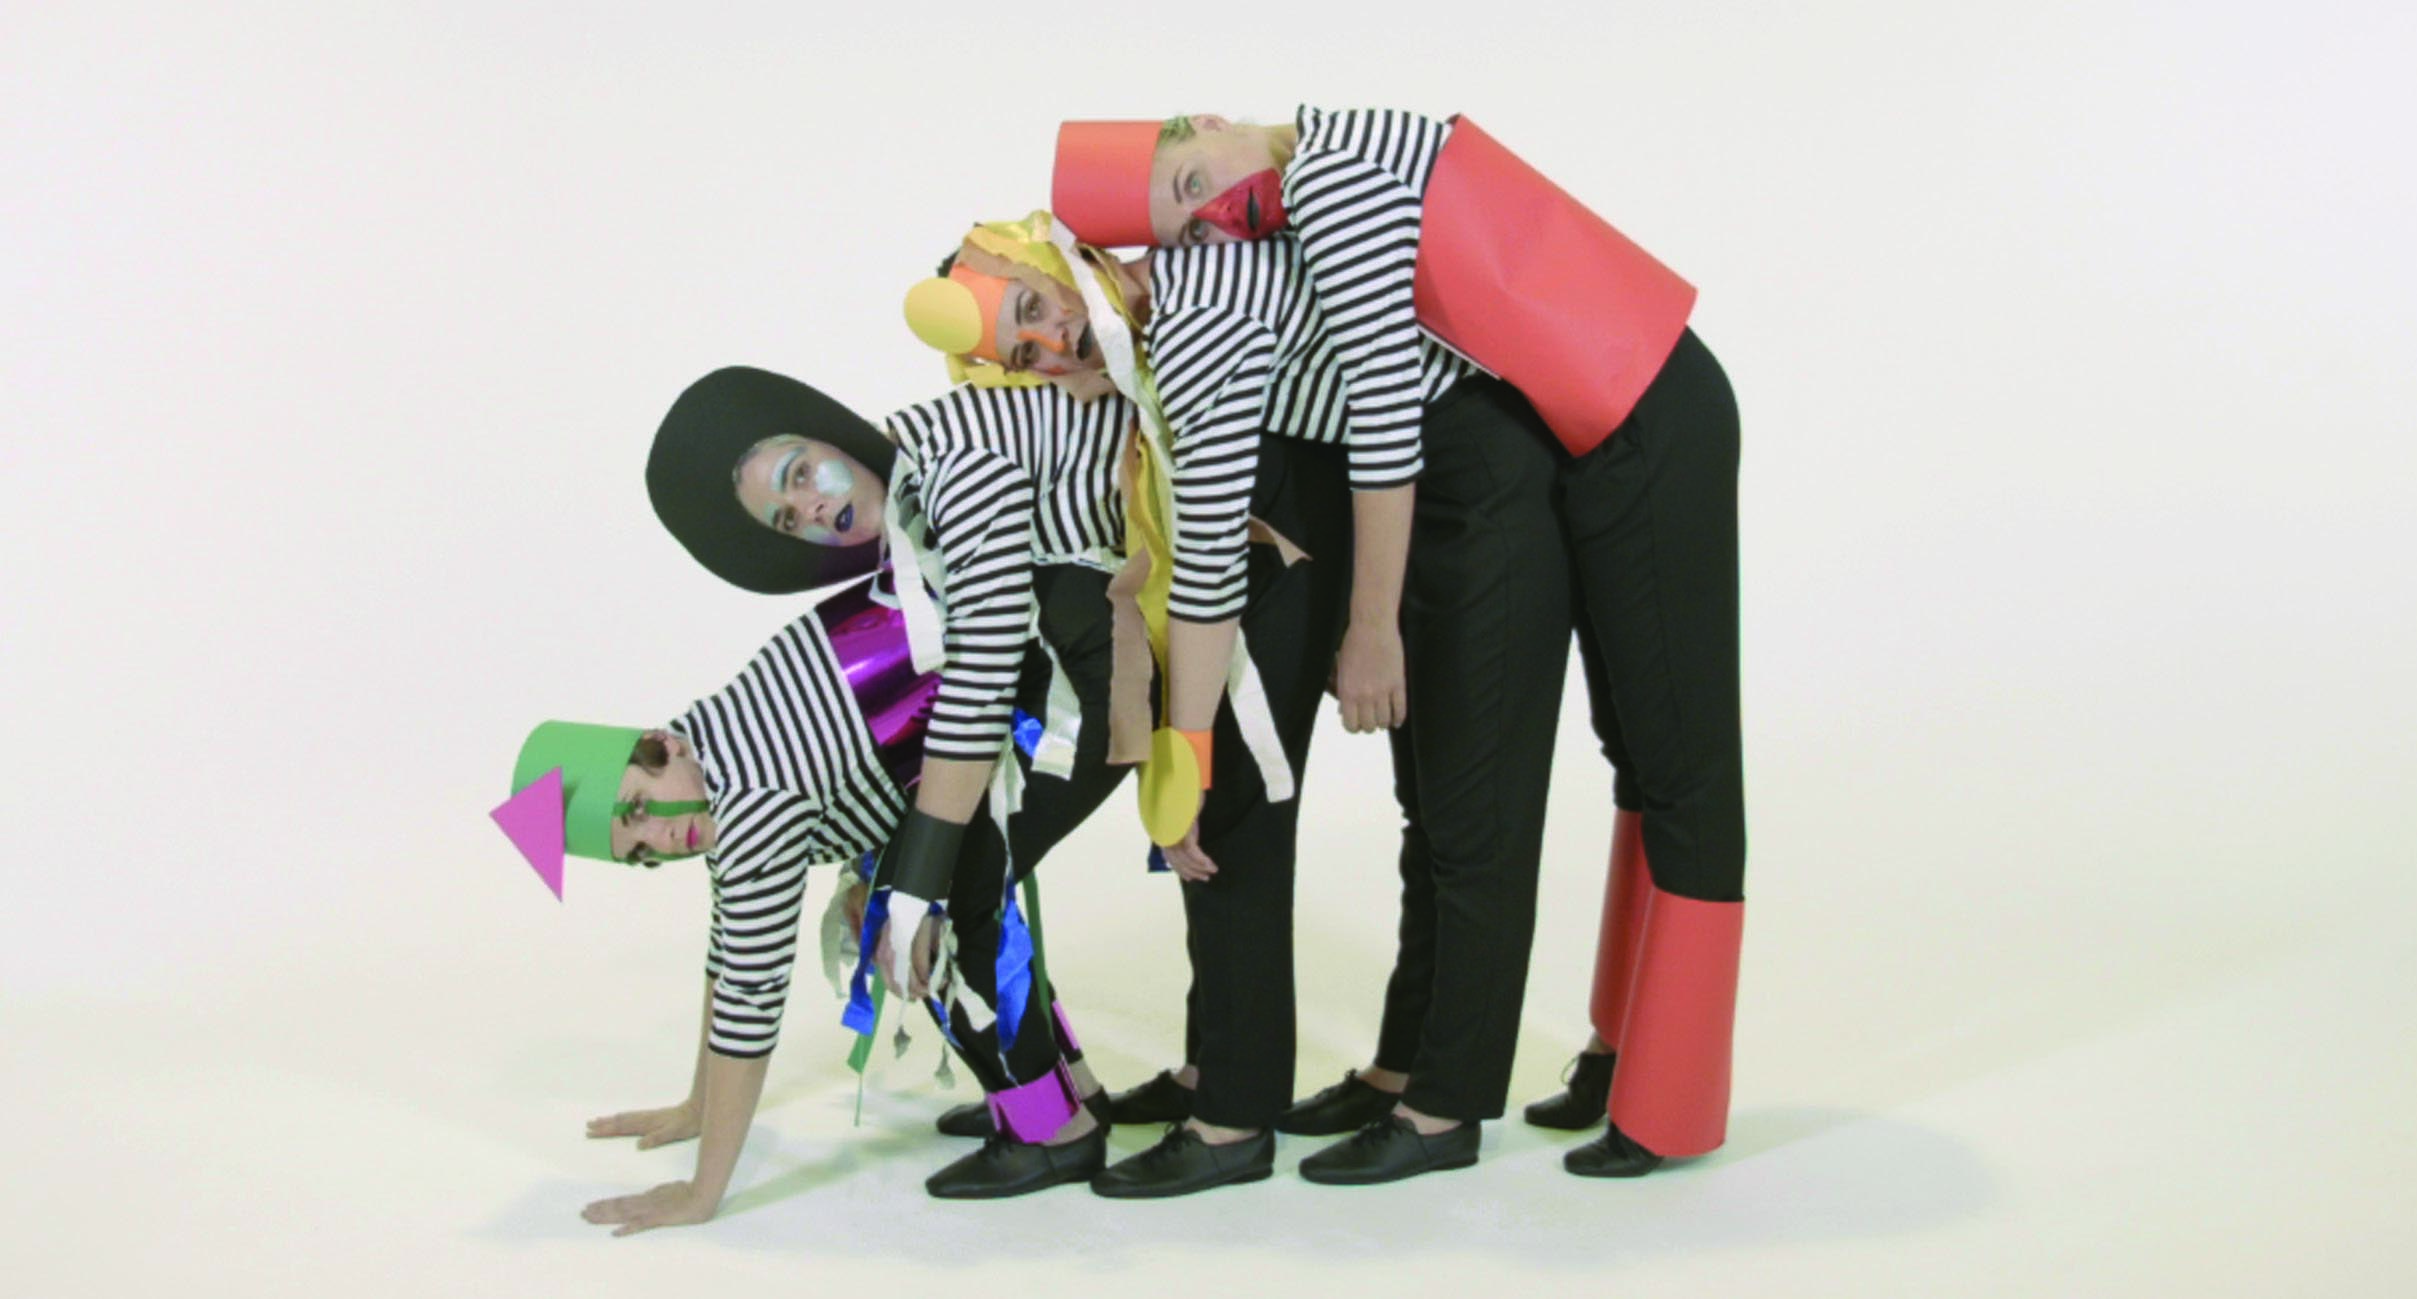 Brown Council, Performance Art (Group Action) (still) 2014, single-channel video, sound. Commissioned by the Museum of Contemporary Art Australia for the Jackson Bella Room, 2014. Image: Courtesy and copyright the artists.